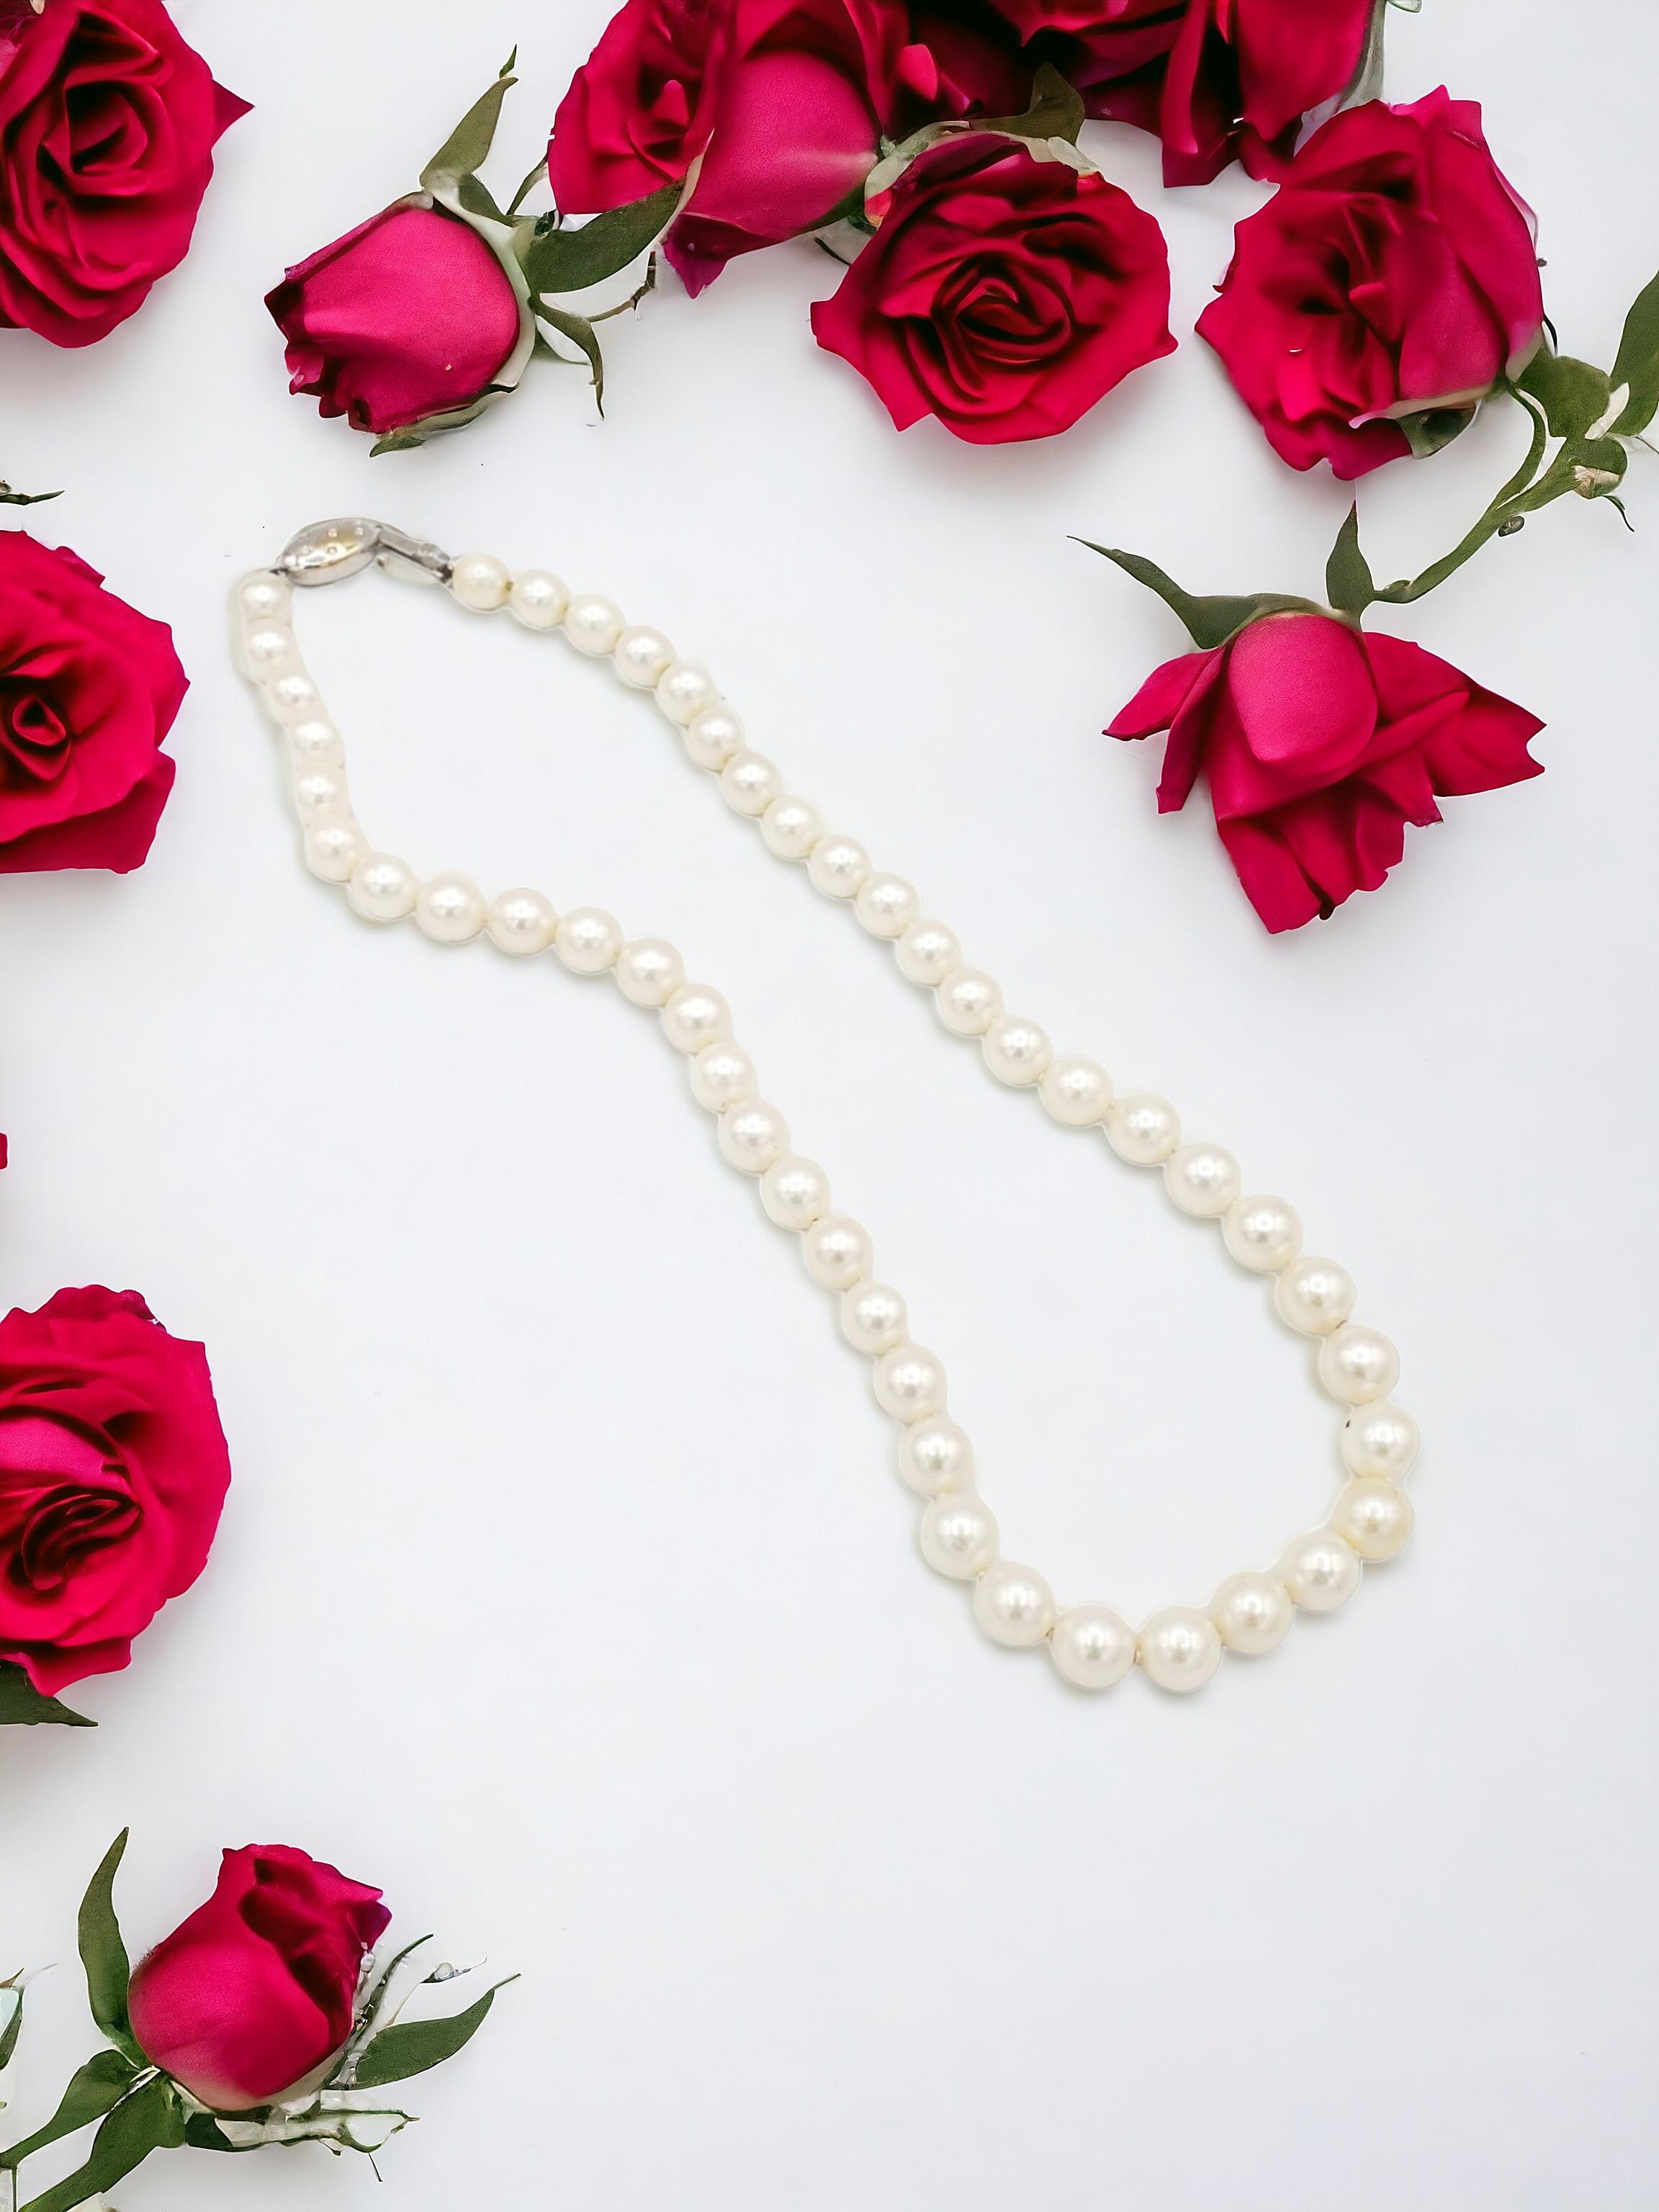 NEW AAA+ Quality Japanese Akoya Salt Water White Pearl Necklace For Sale 12